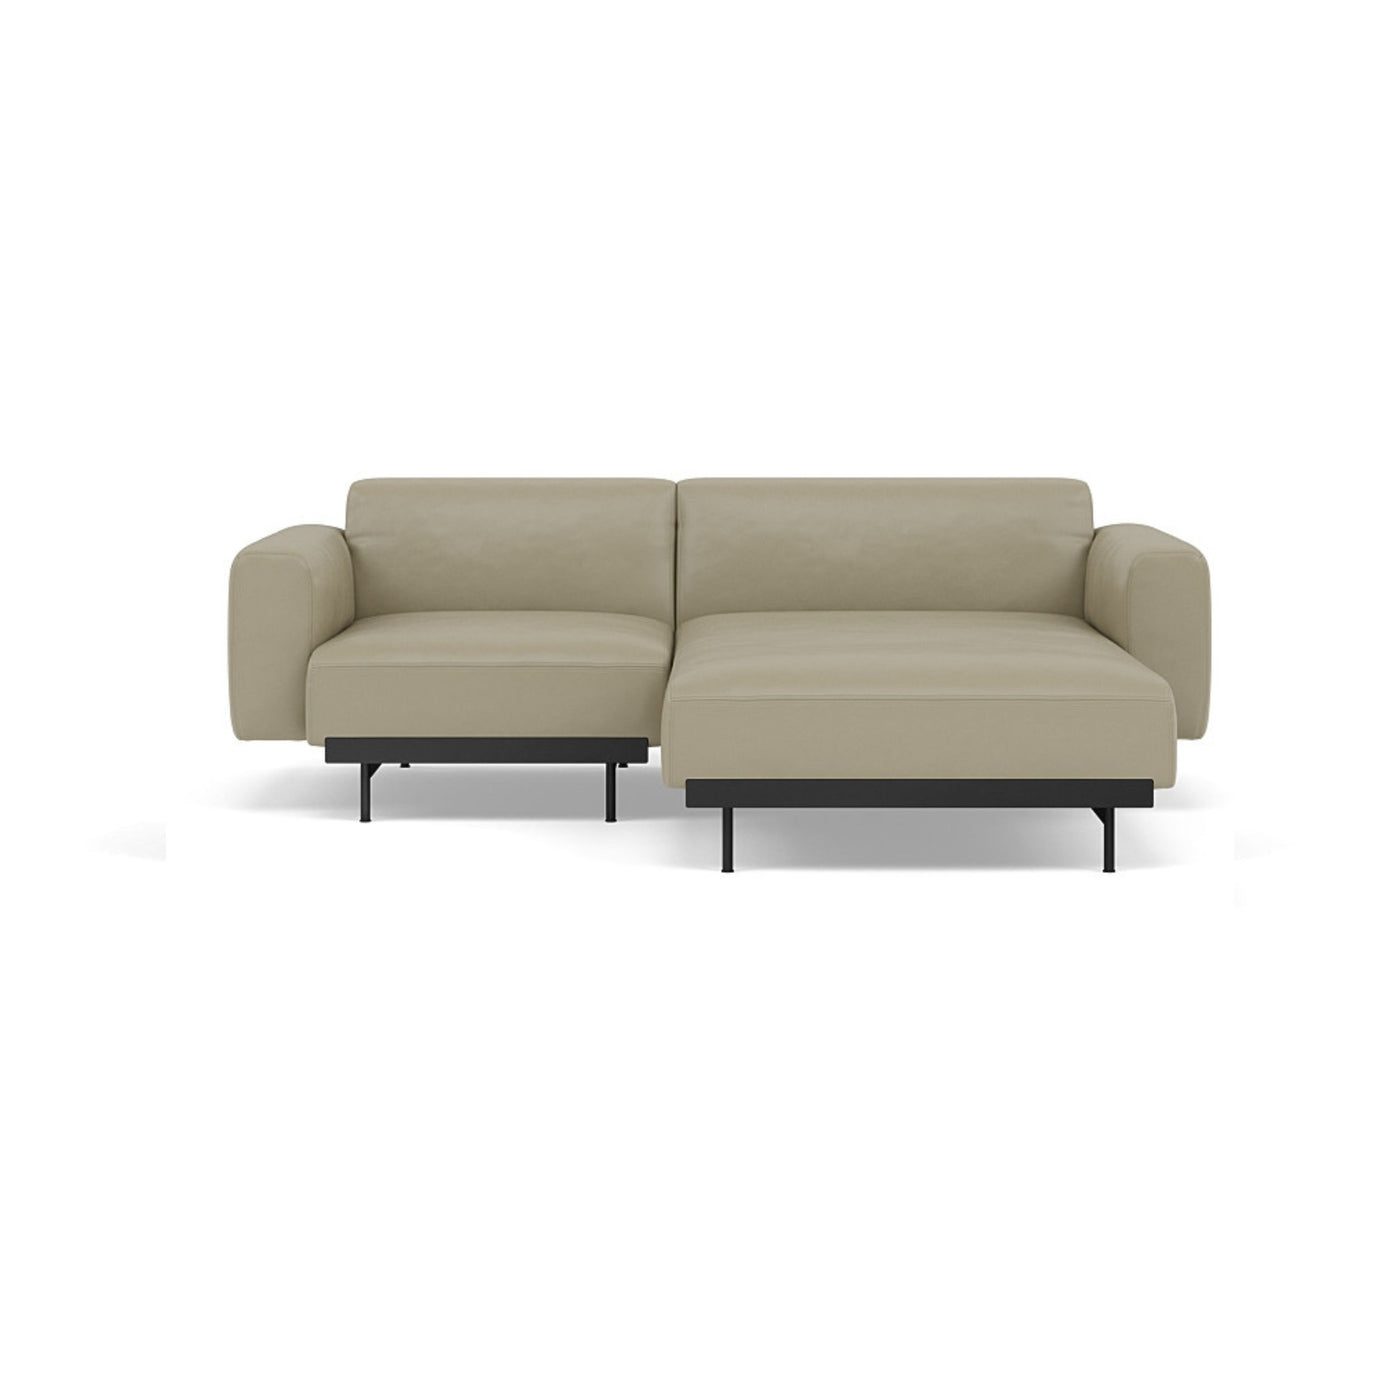 Muuto In Situ 2 Seater sofa in configuration 4. Made to order from someday designs. #colour_stone-refine-leather